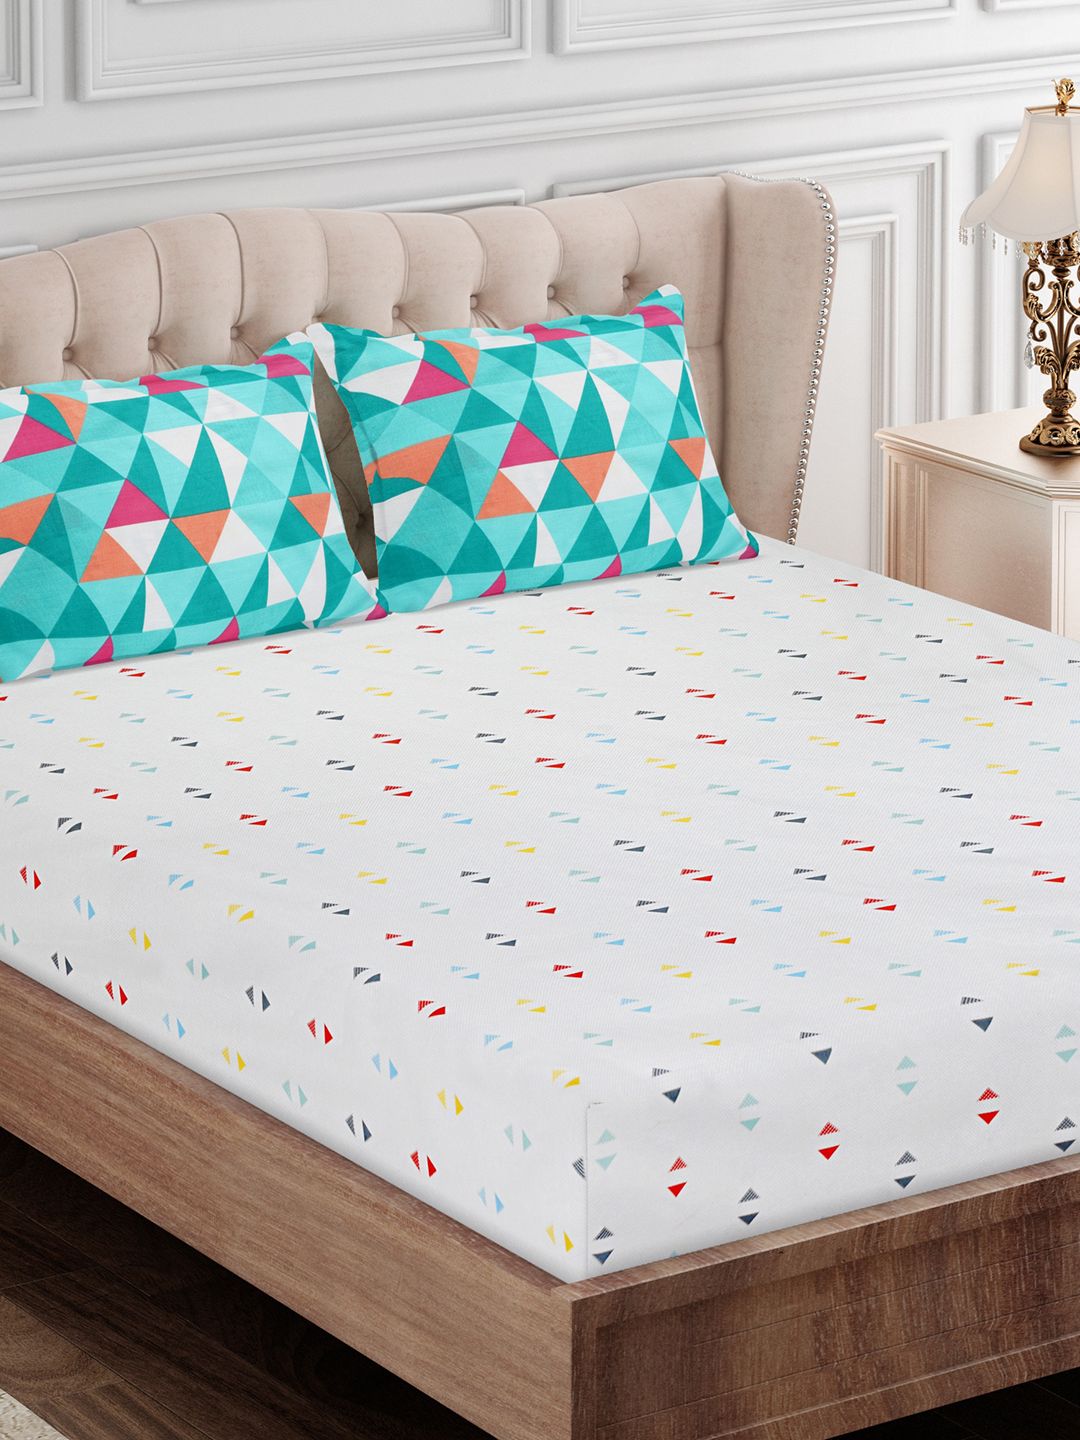 SEJ by Nisha Gupta Grey & Red Geometric 180 TC King Bedsheet with 2 Pillow Covers Price in India